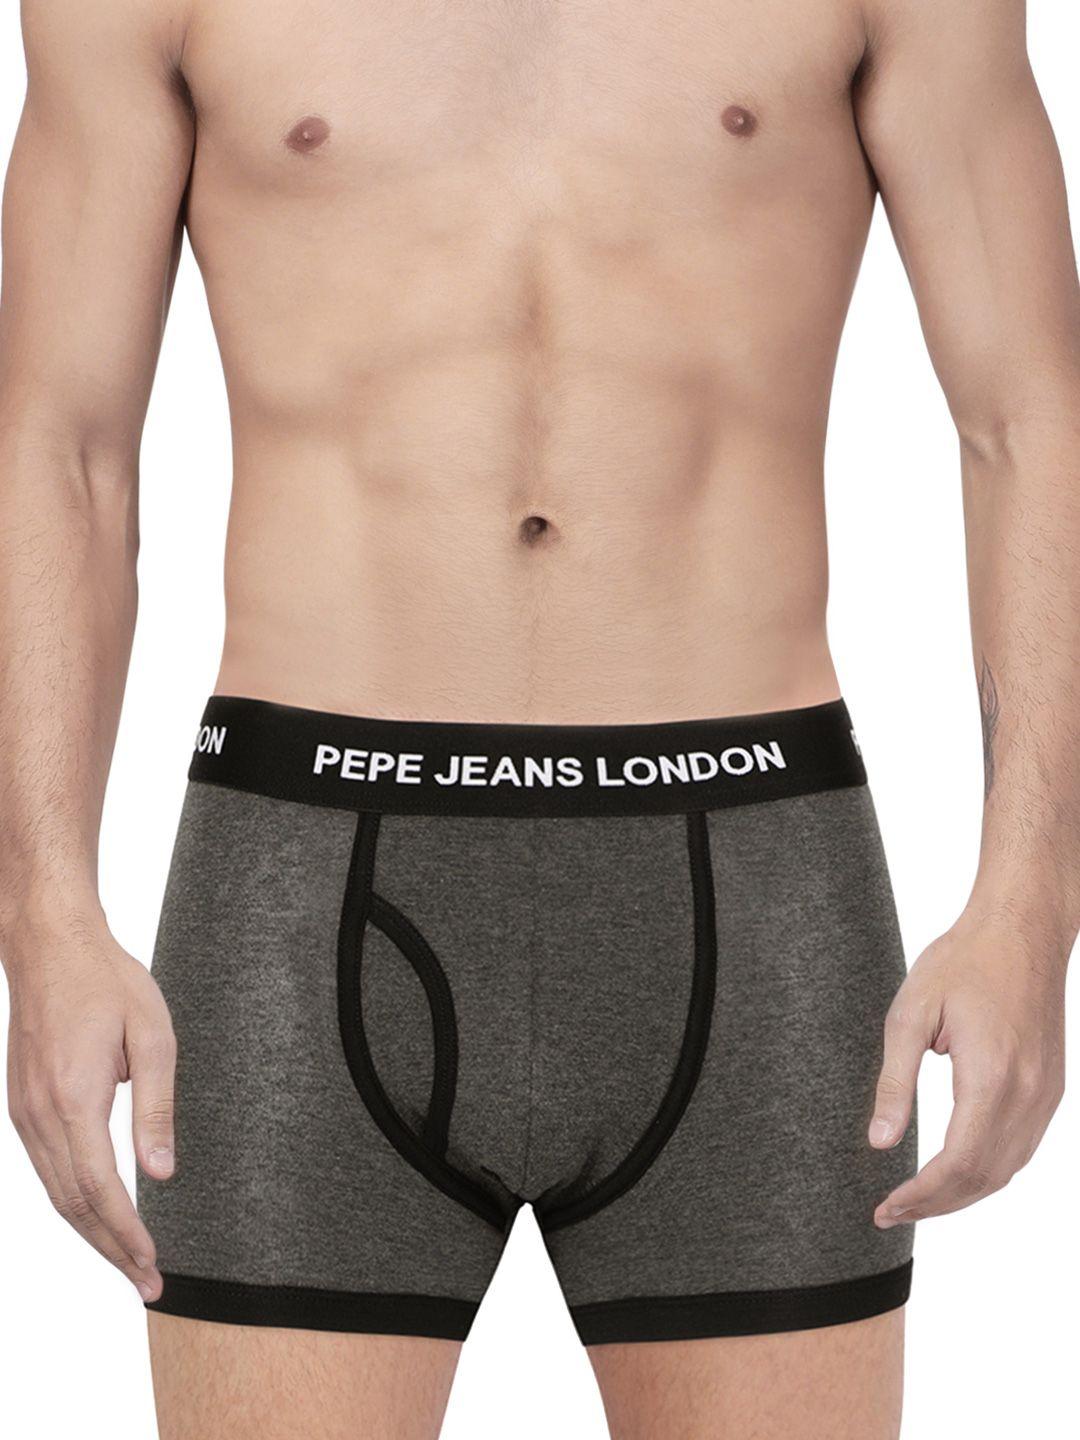 pepe jeans men charcoal grey solid hipster trunks 8904311304876